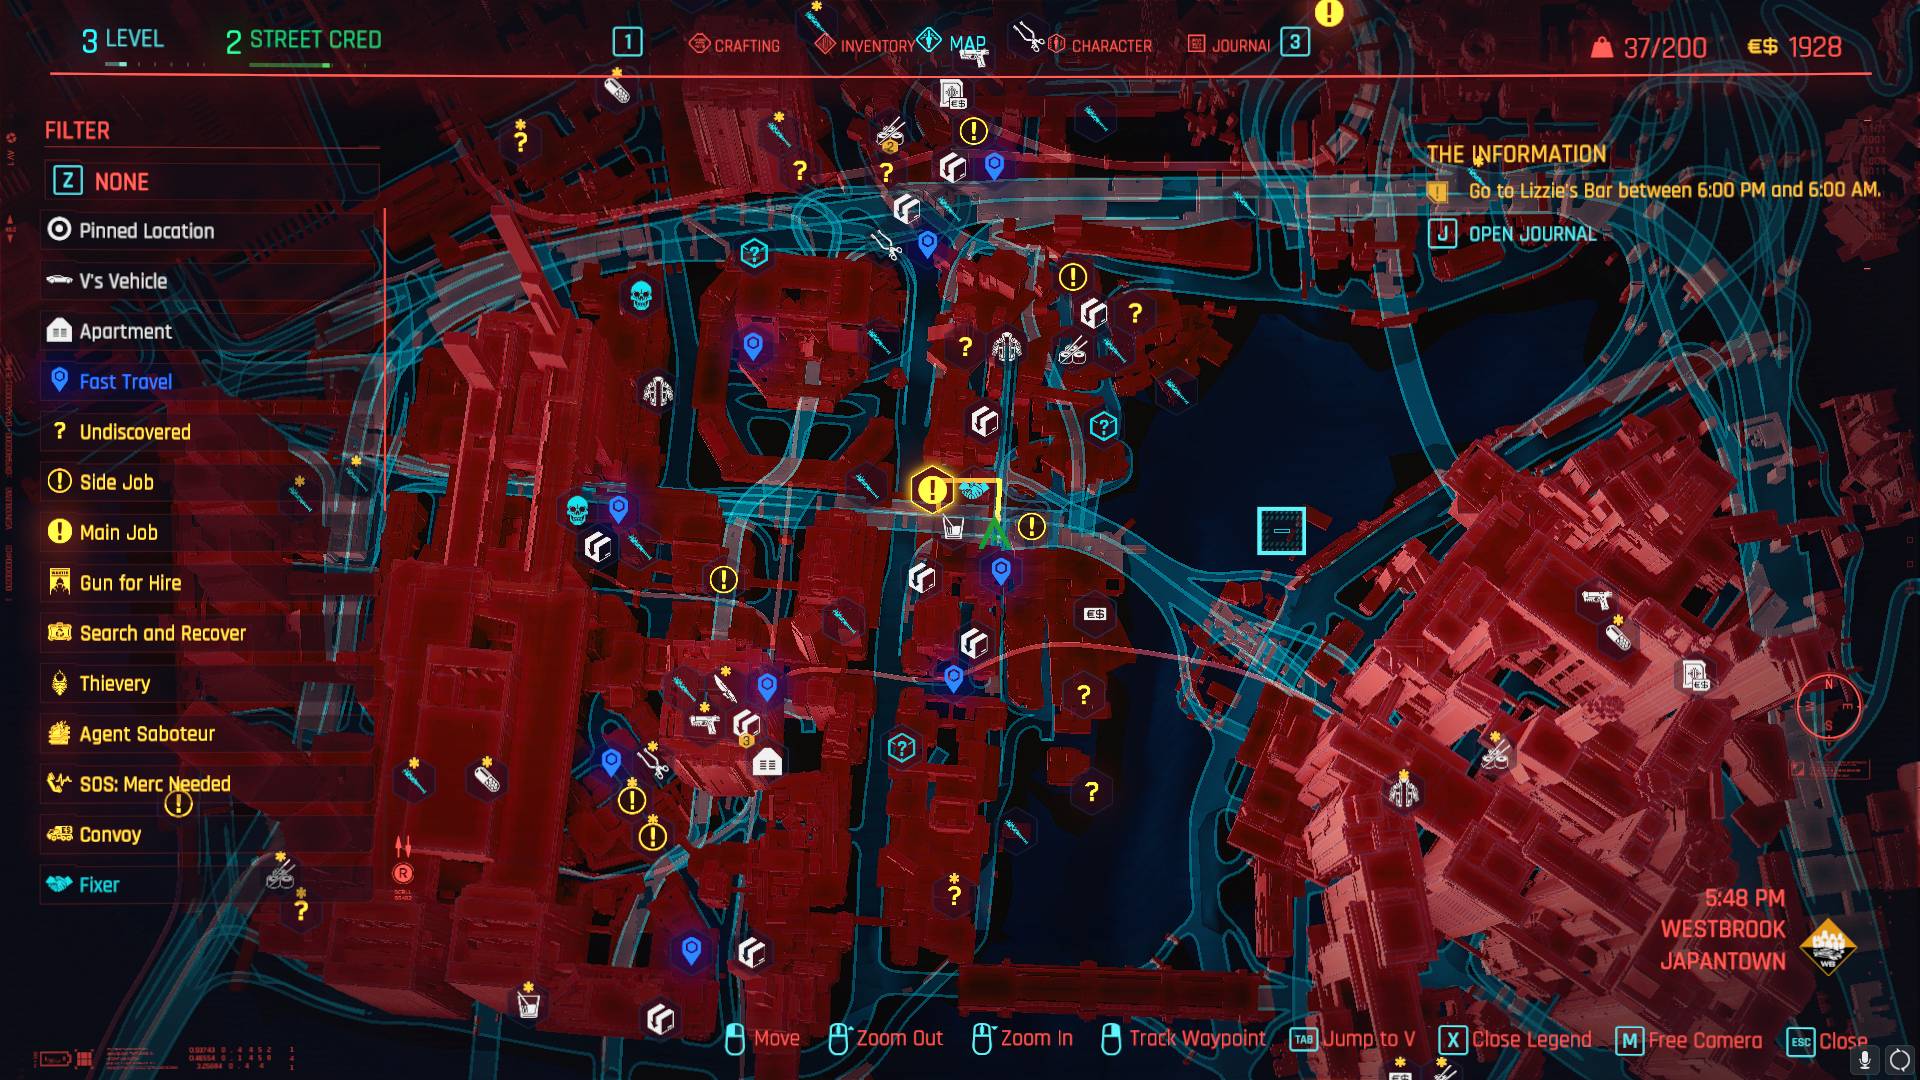 cyberpunk 2077 map city points night red interest locations pcgamesn easiest earn cred street way